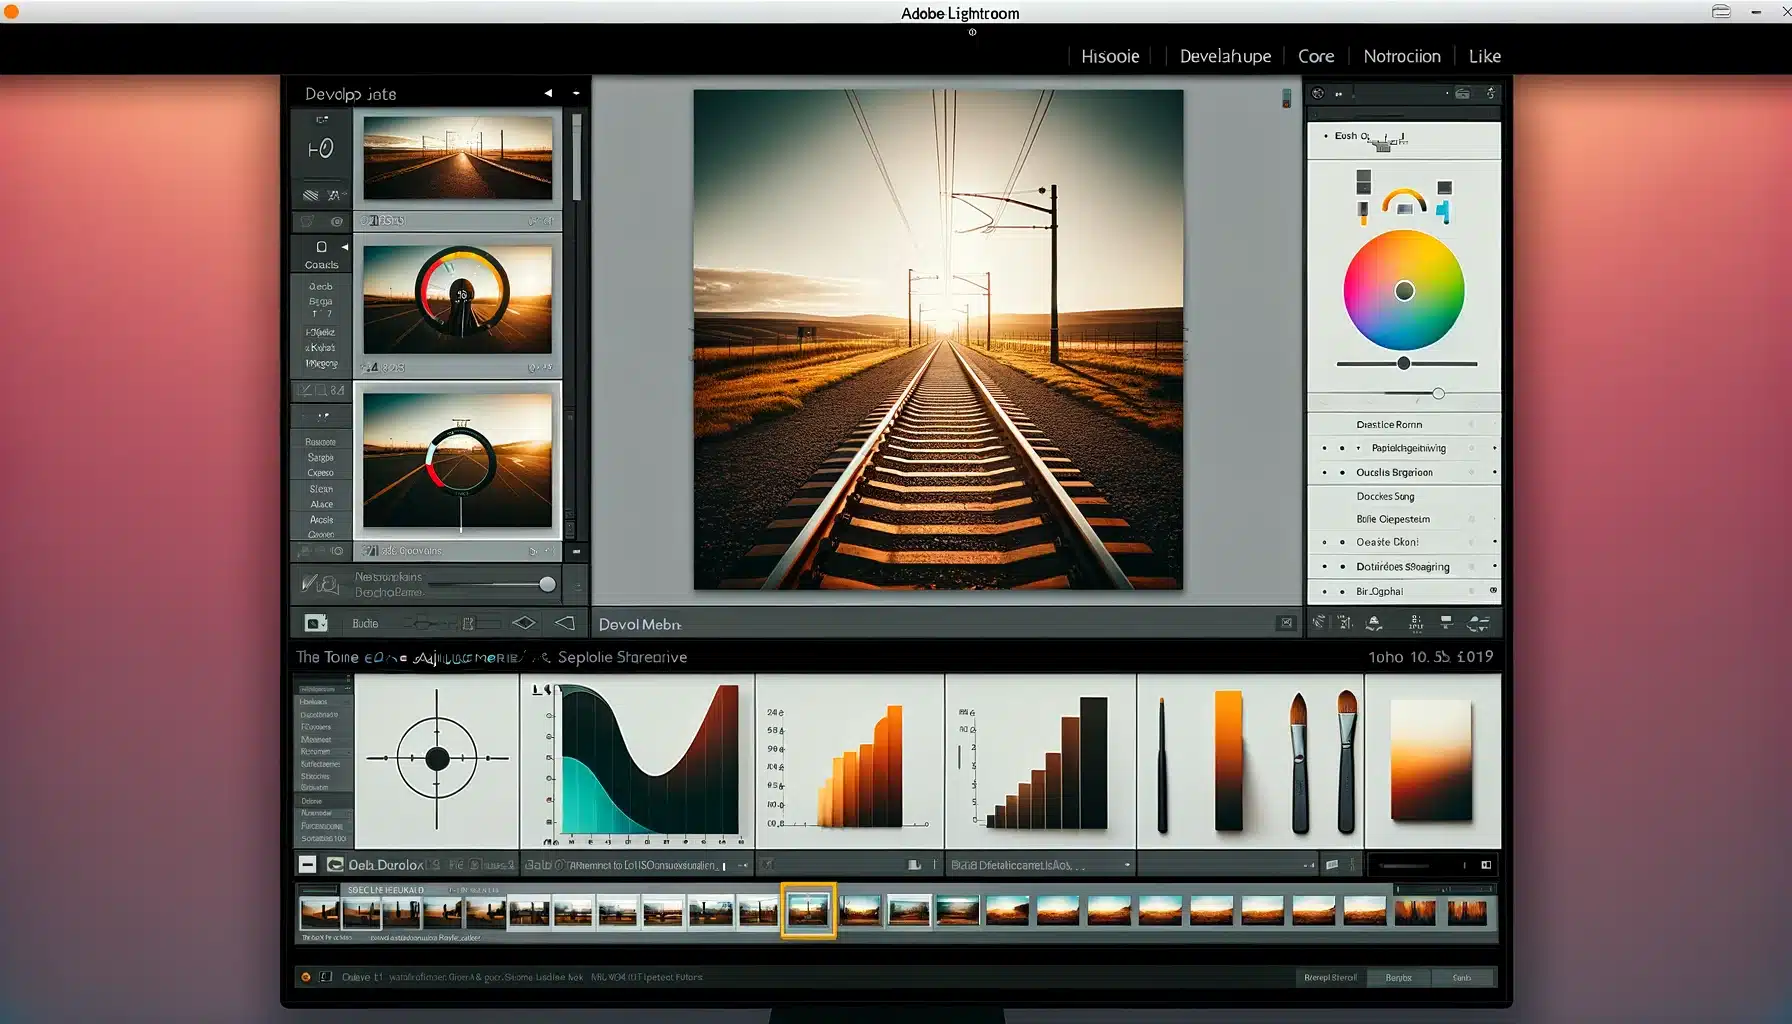 Adobe LR's develop module in use, showing detailed photo enhancement features.